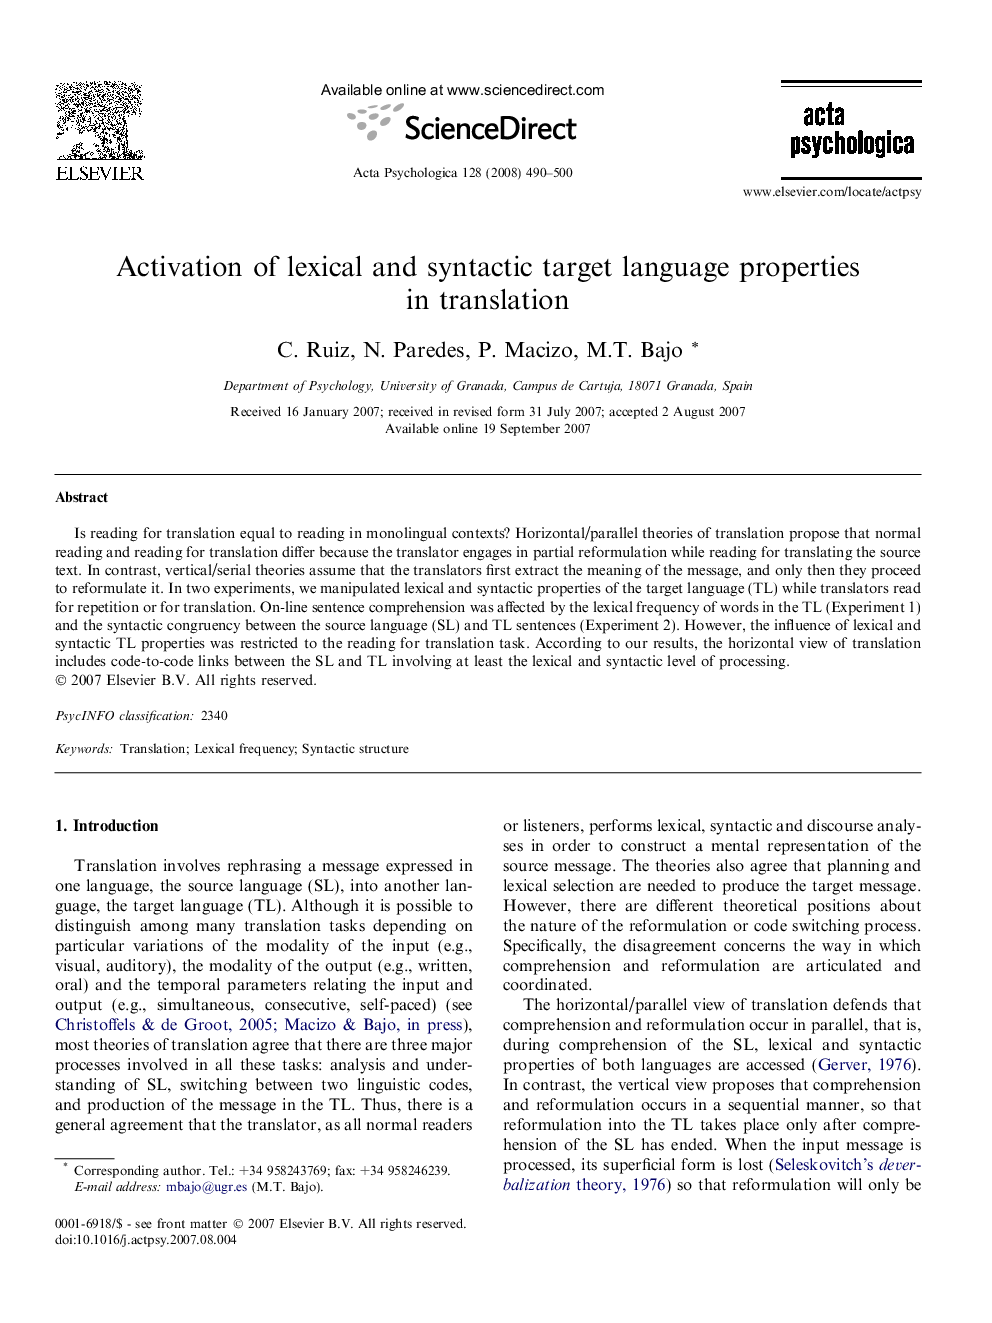 Activation of lexical and syntactic target language properties in translation